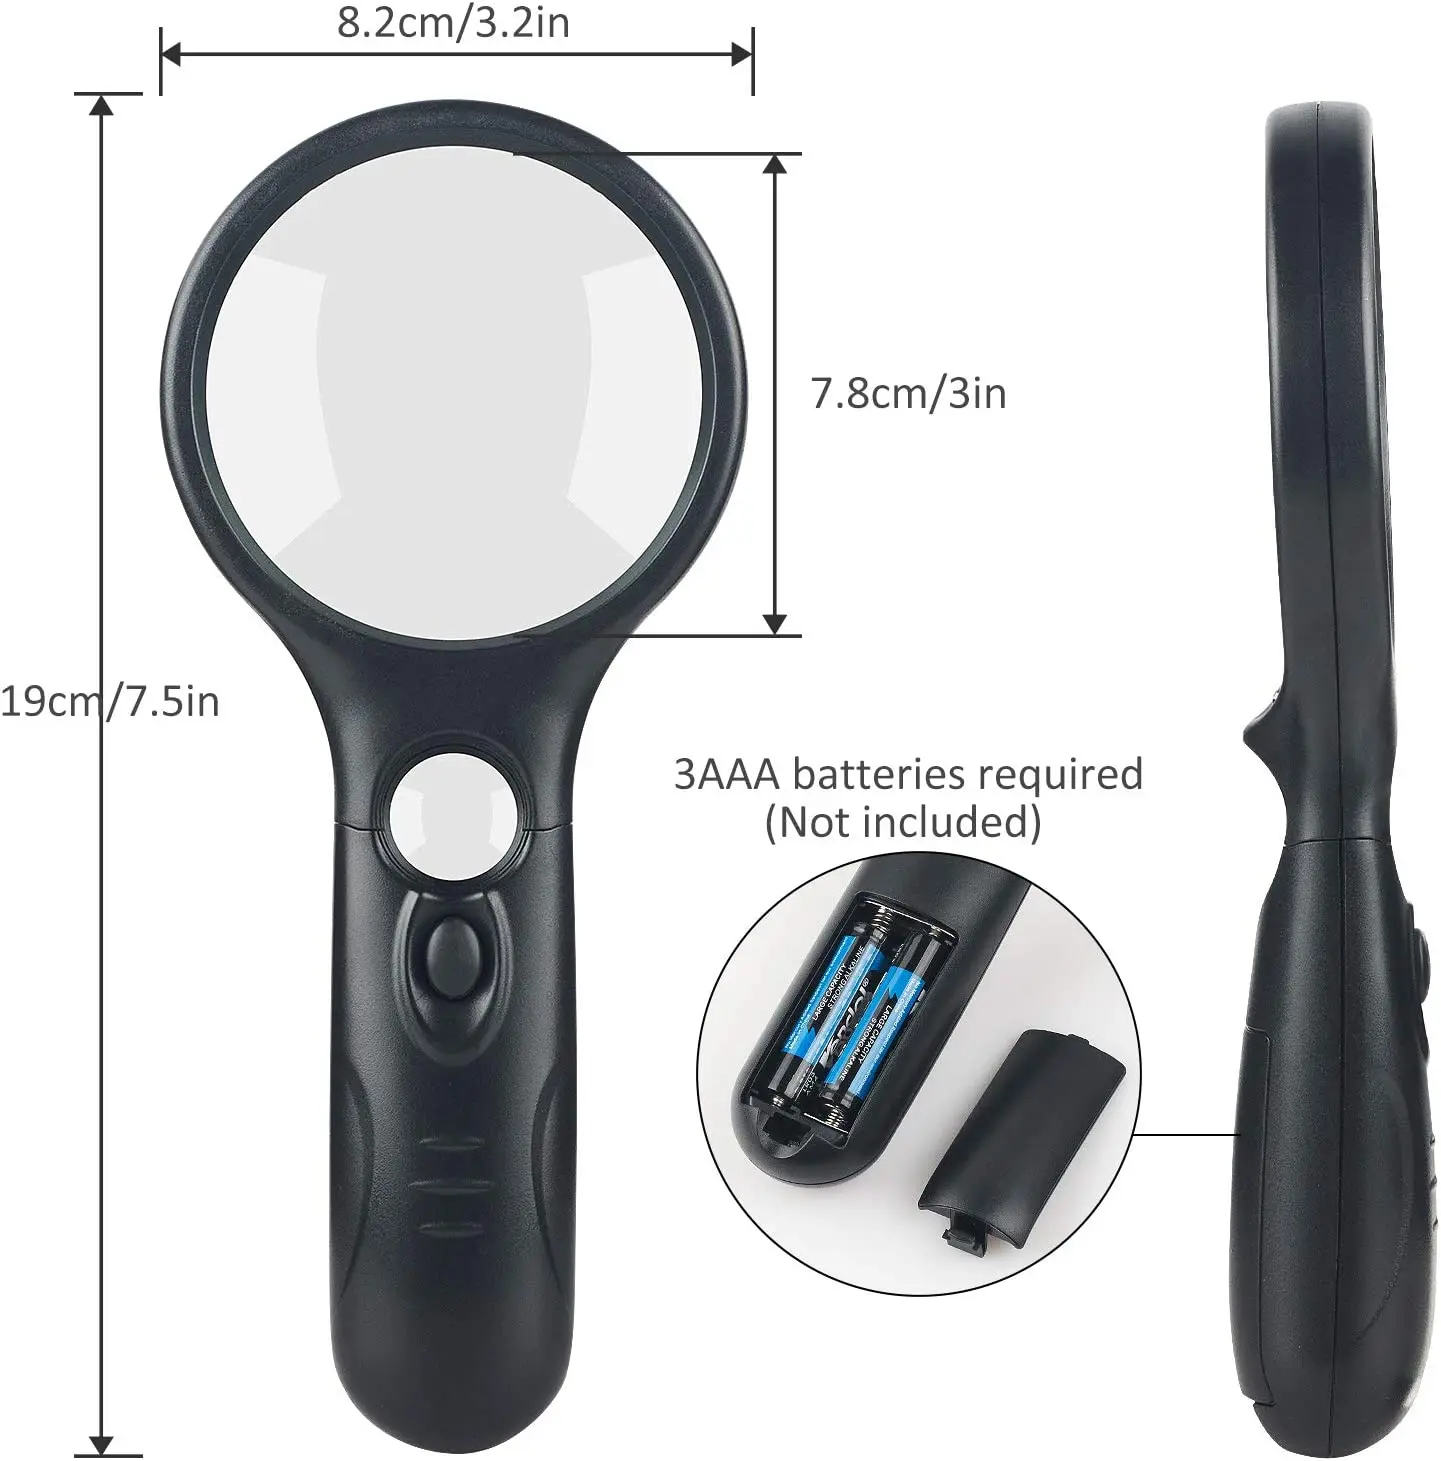 Handheld Magnifying Glass with Light